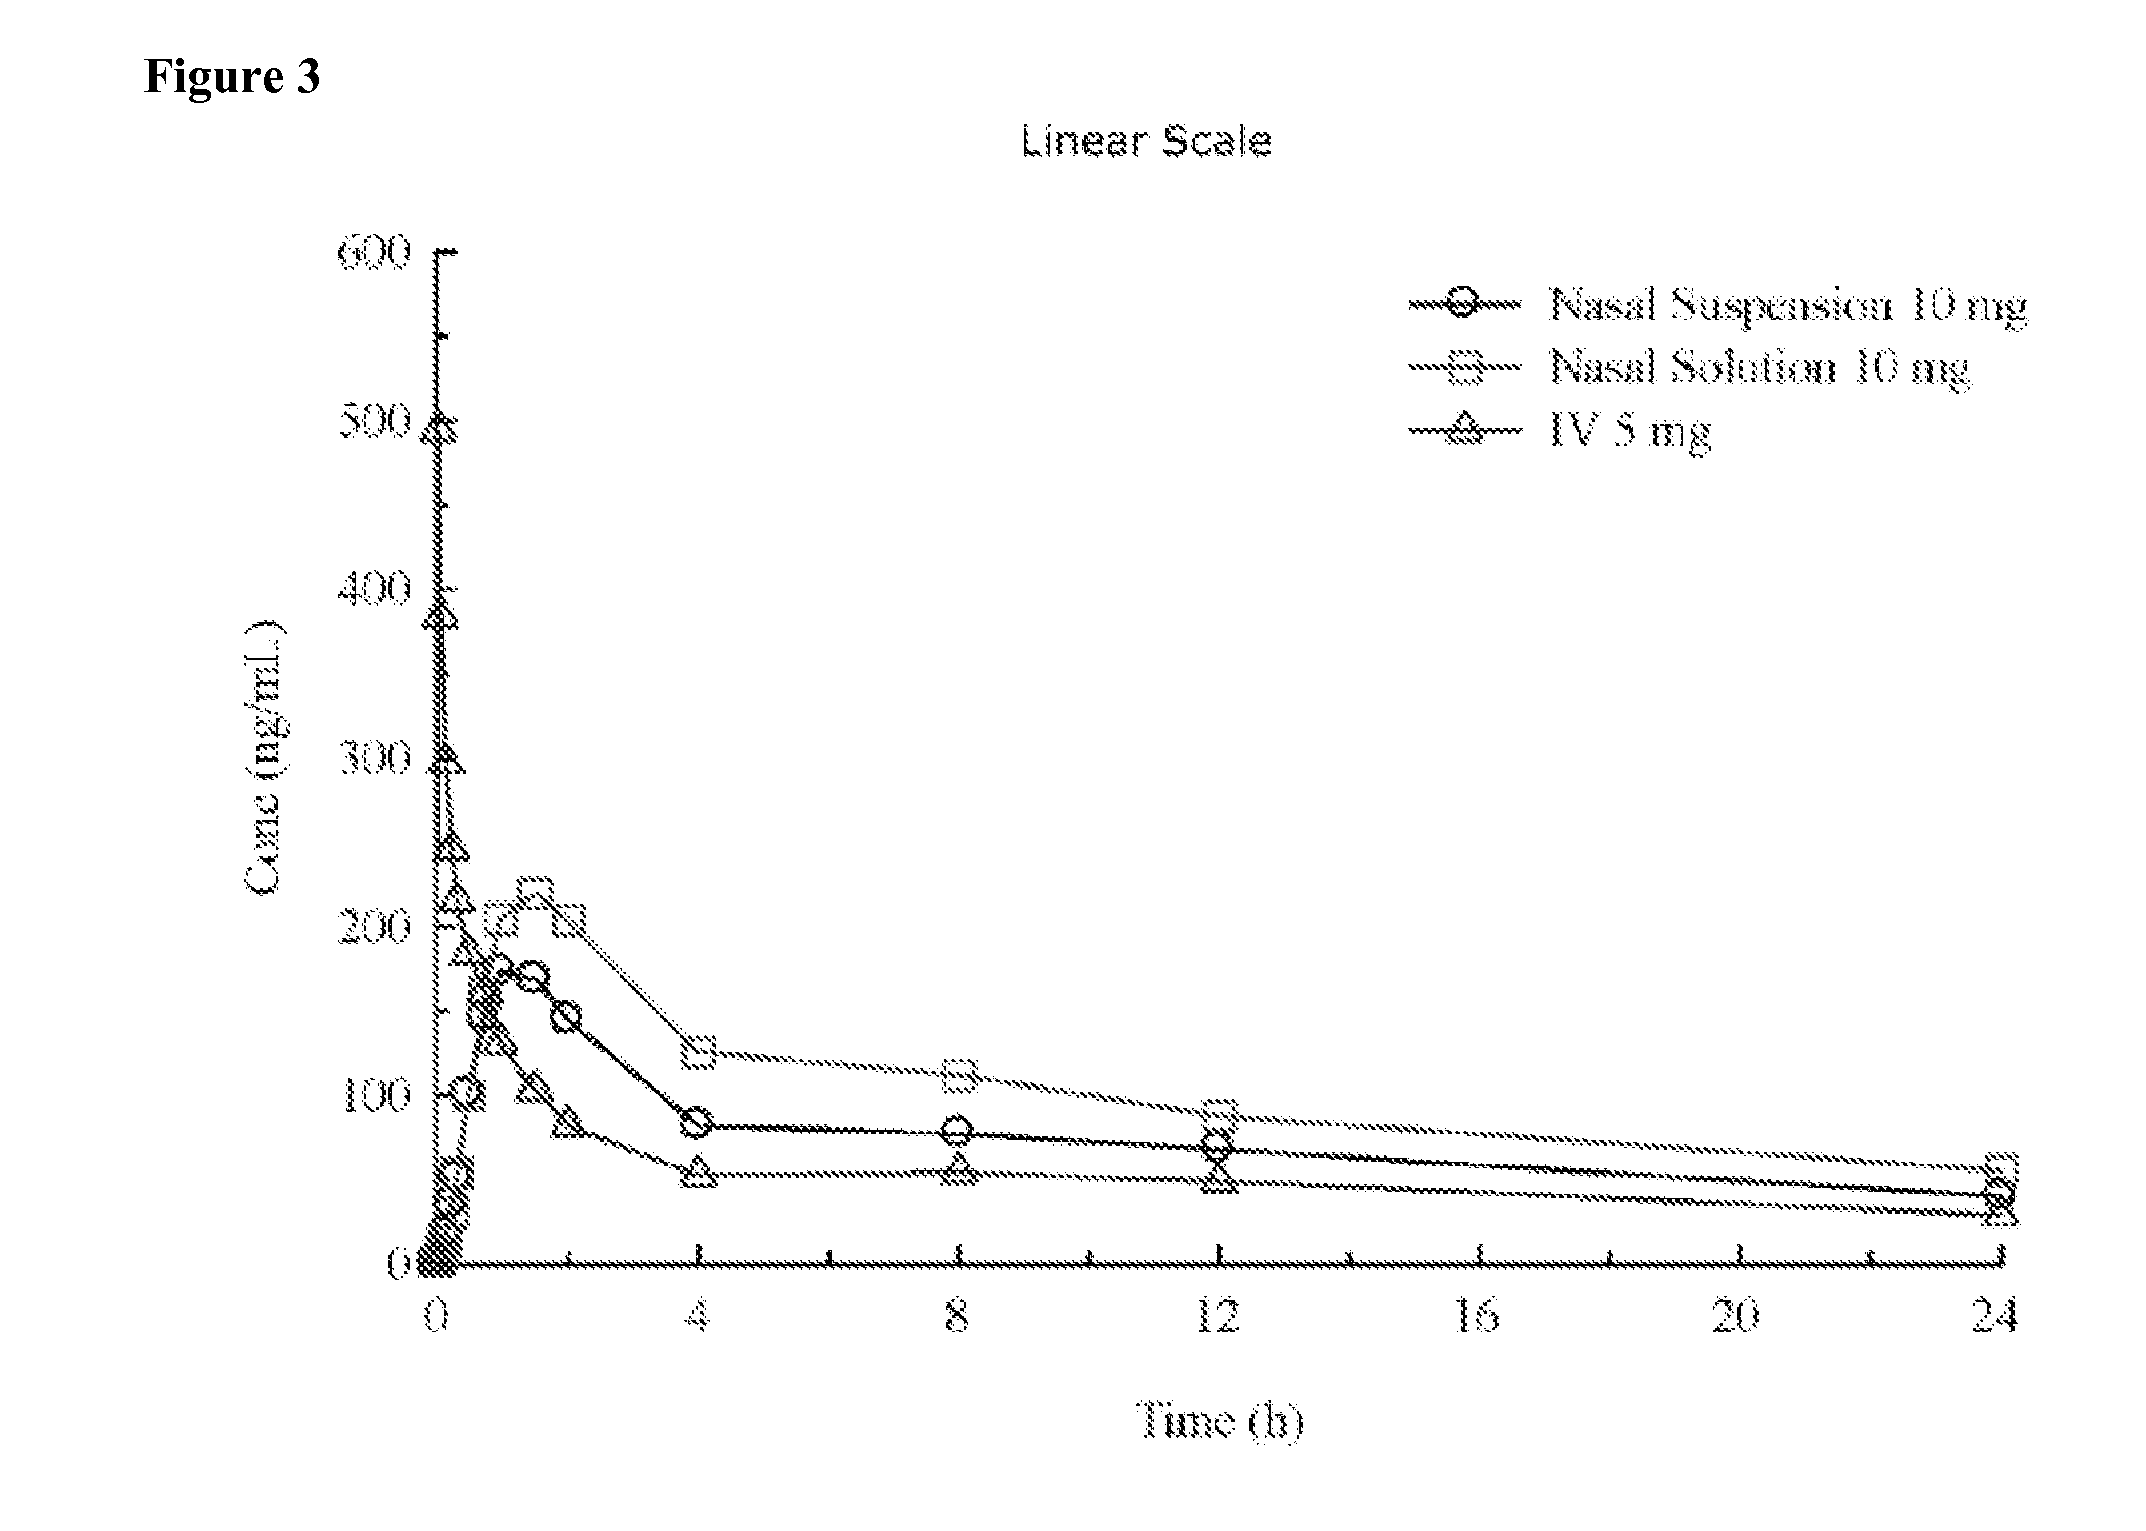 Administration of benzodiazepine compositions